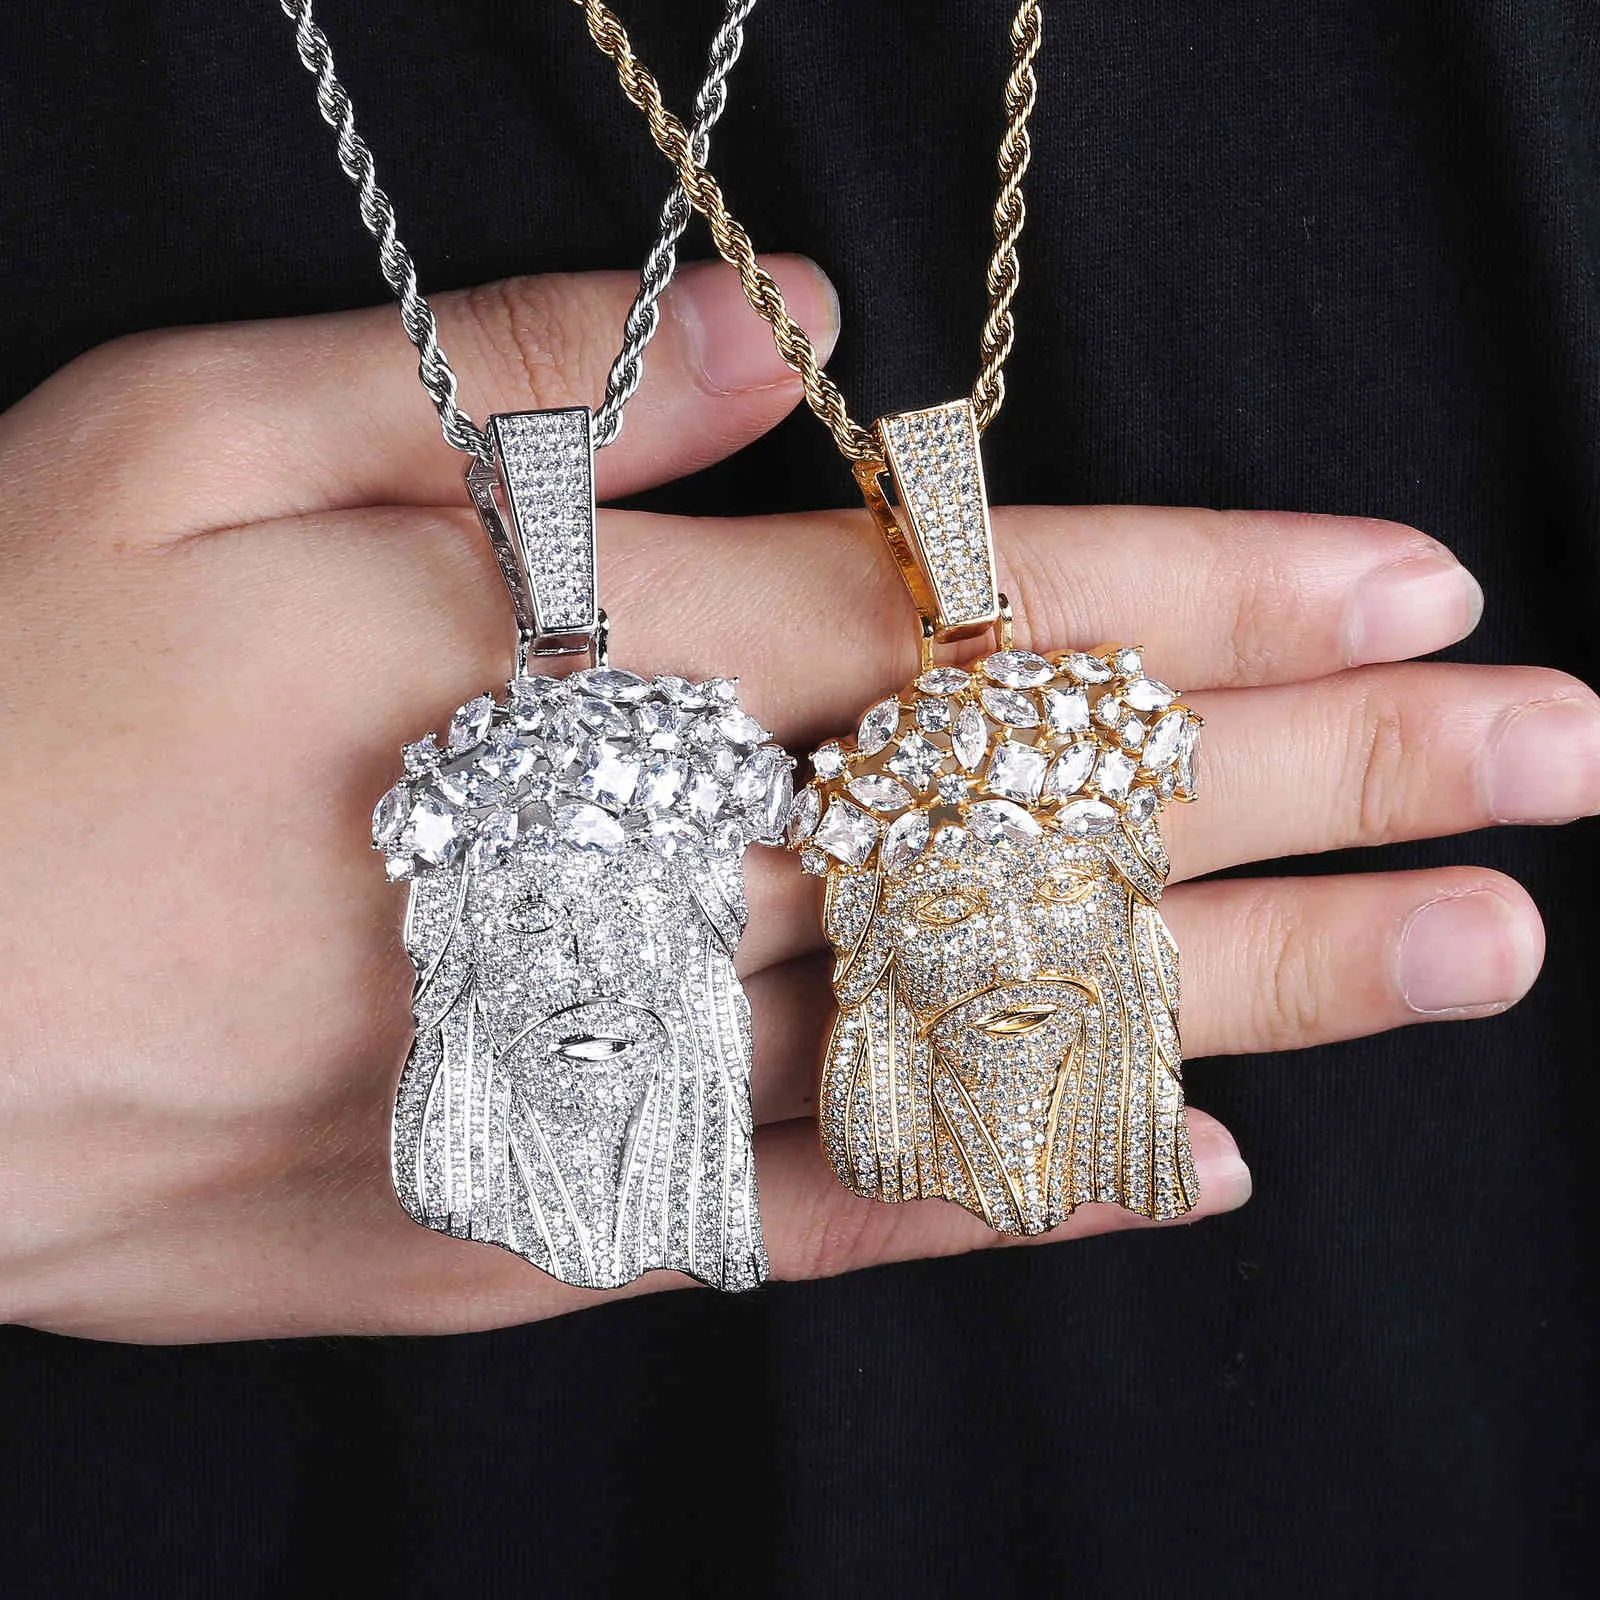 New Big Size Jesus Pendant Necklace With Tennis Chain Mens Iced Out Charm Jewelry Gold Silver Color Chain Hip Hop Jewelry 210323263I